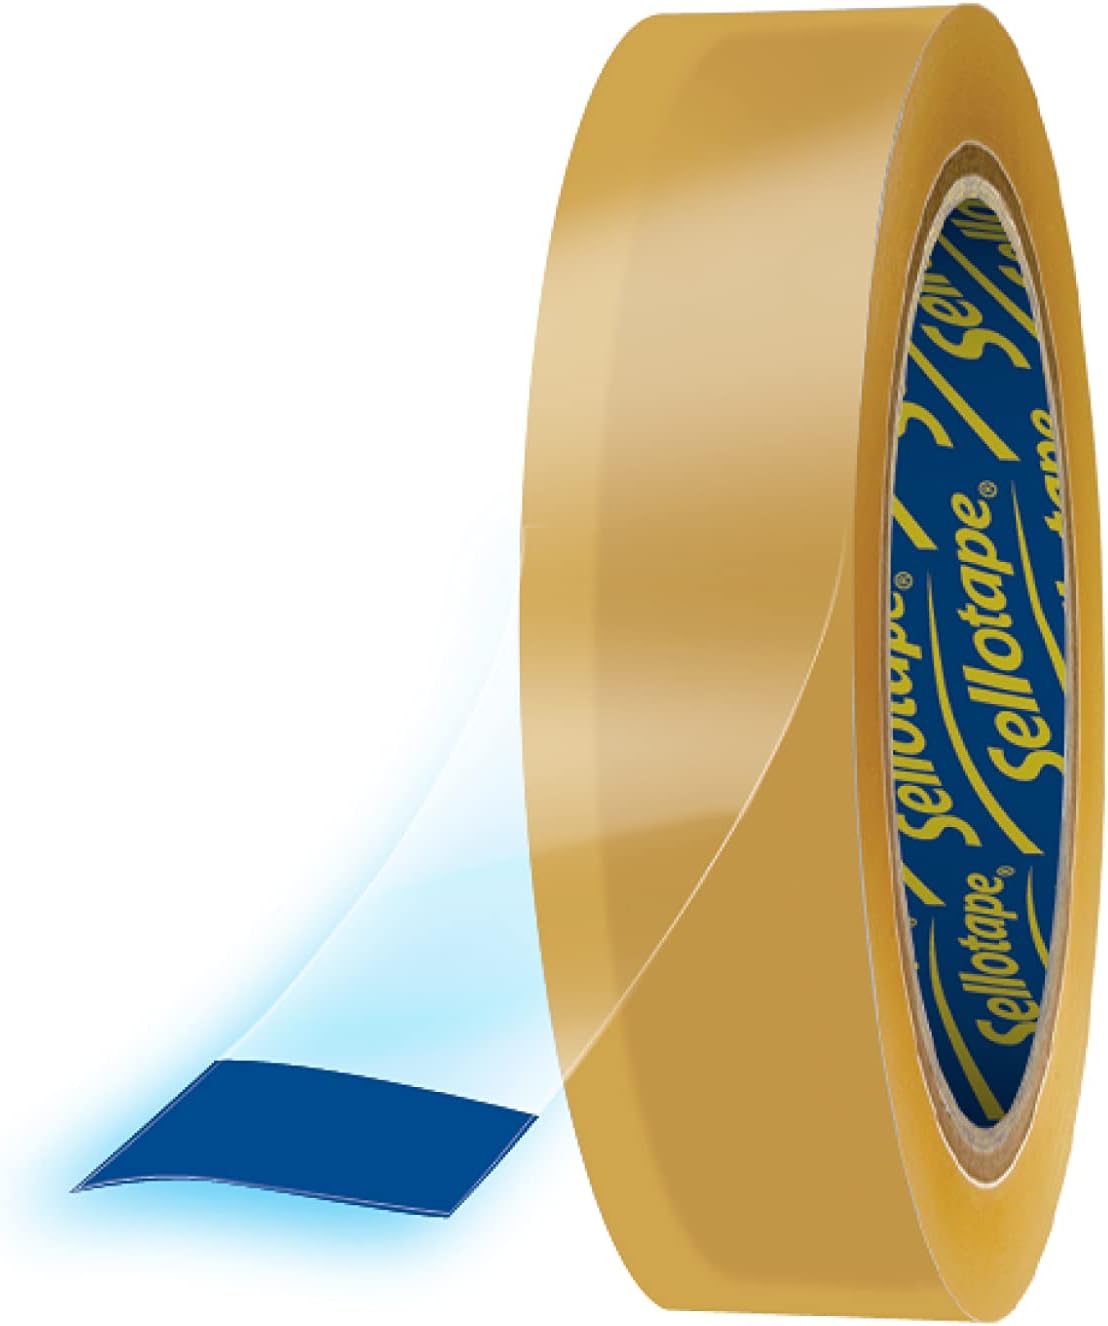 Box of 8 Sellotape Original Golden Sticky Tapes 18mmx33m